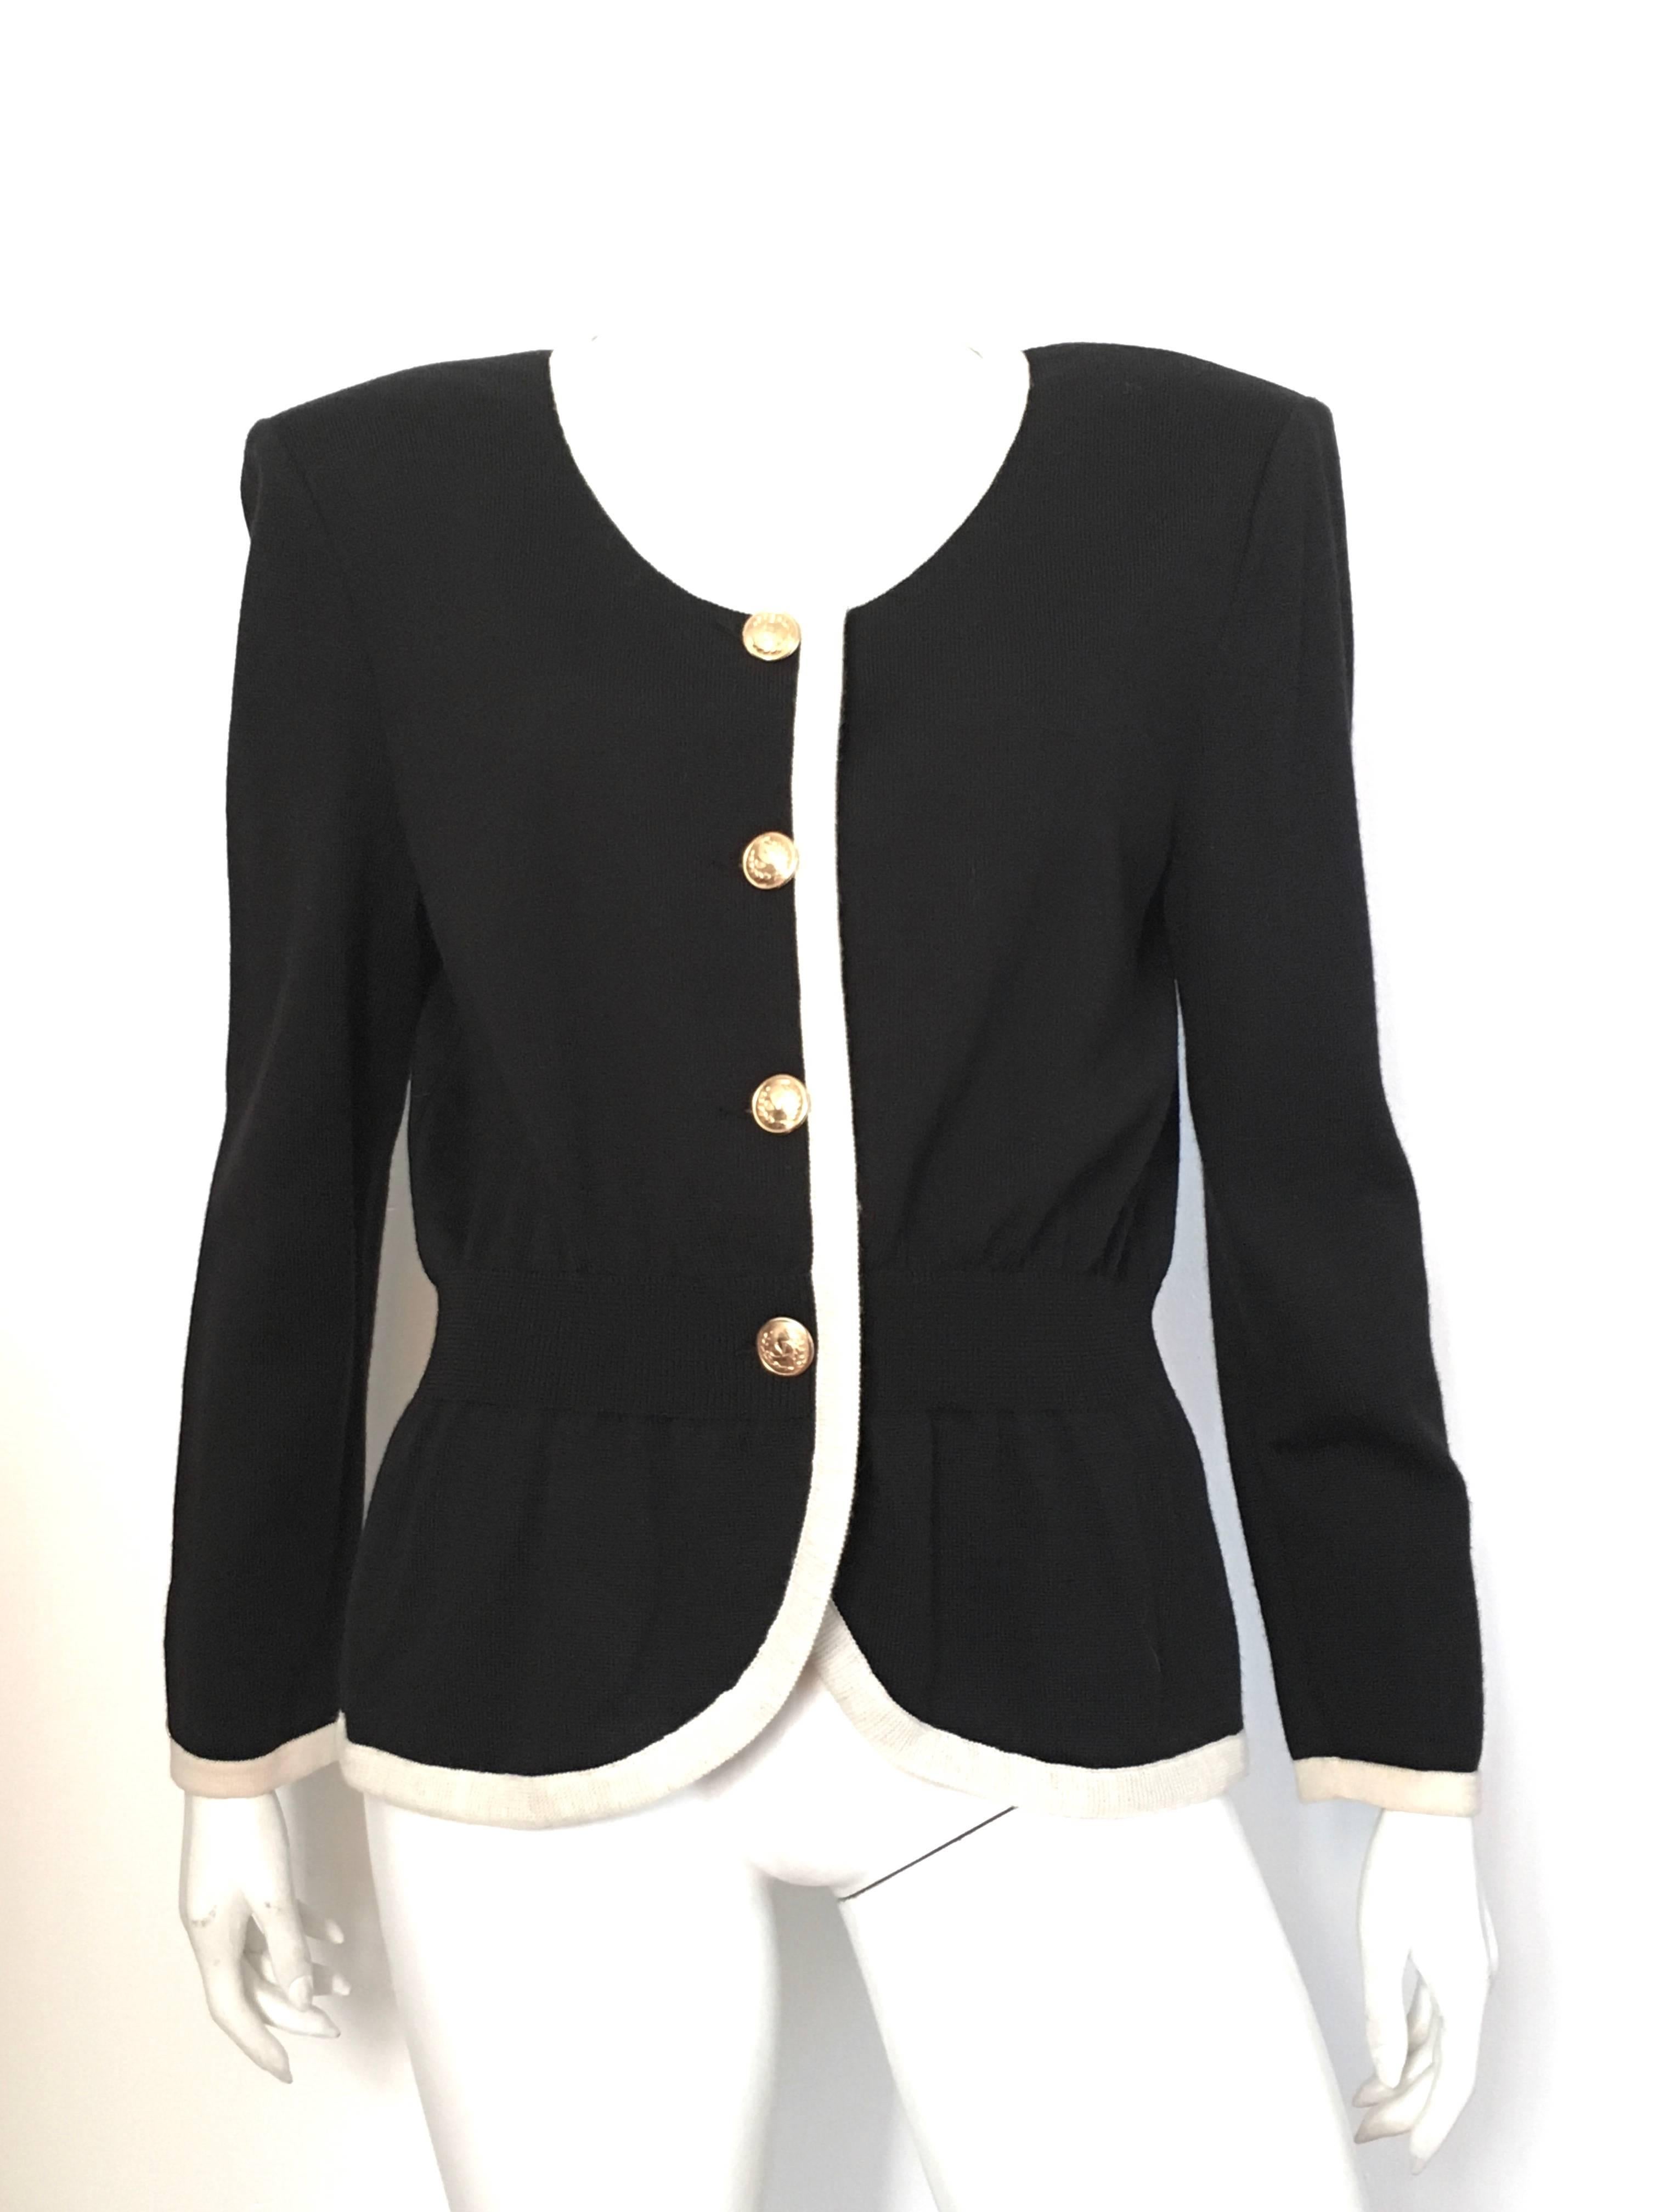 Valentino Miss V black wool knit cardigan with gold V buttons is labeled a size 14 / 48 but fits like an USA size 10/12. Ladies please grab your tape measure so you can properly measure your bust, waist & sleeves to make certain this item will